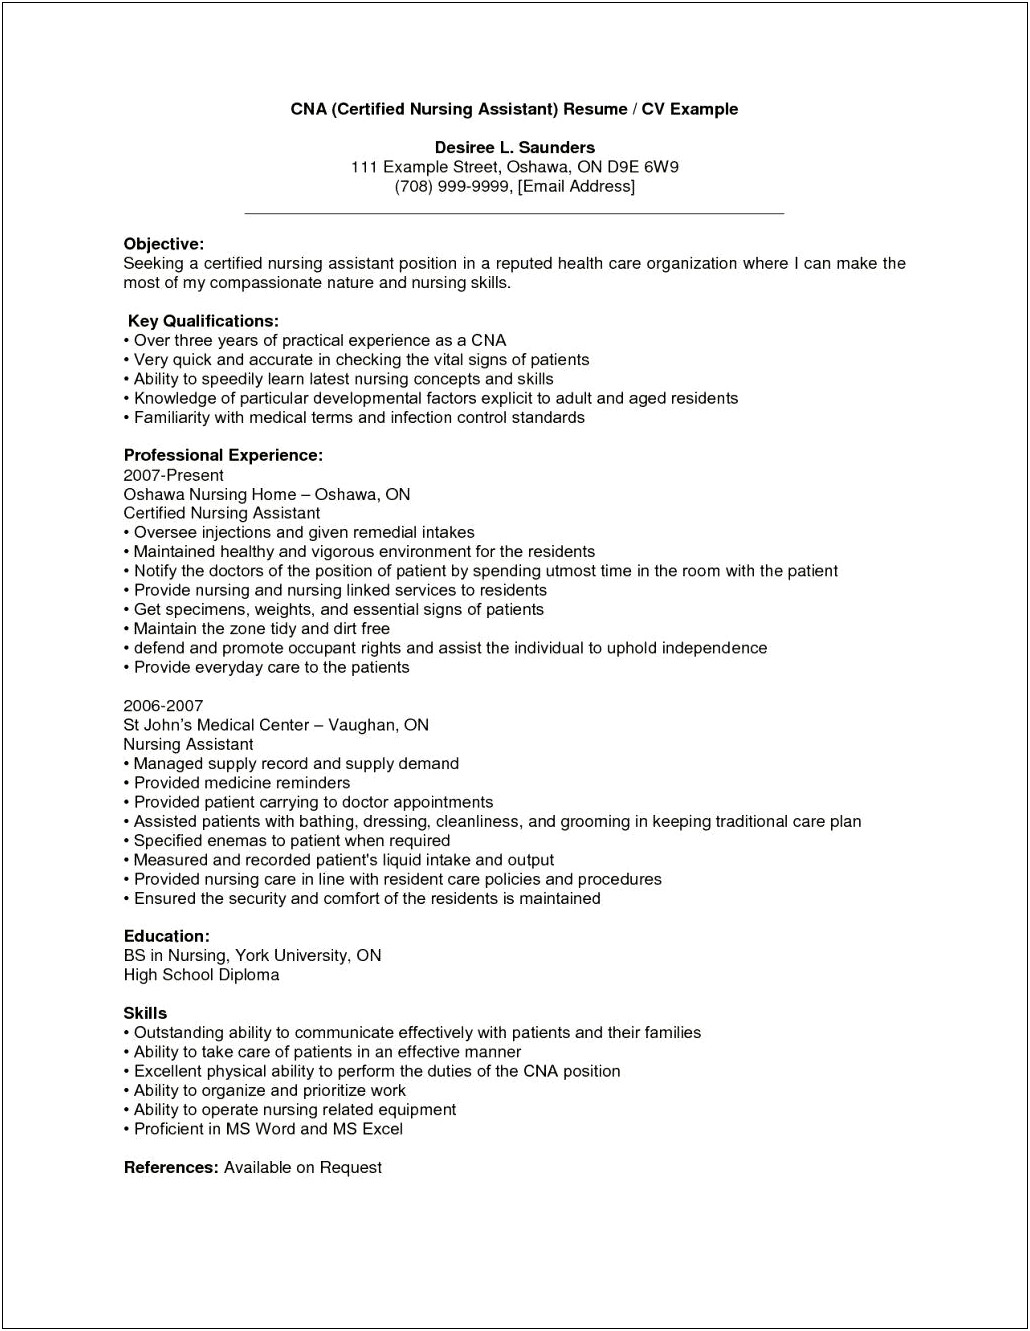 Resume Objective For Cna Position